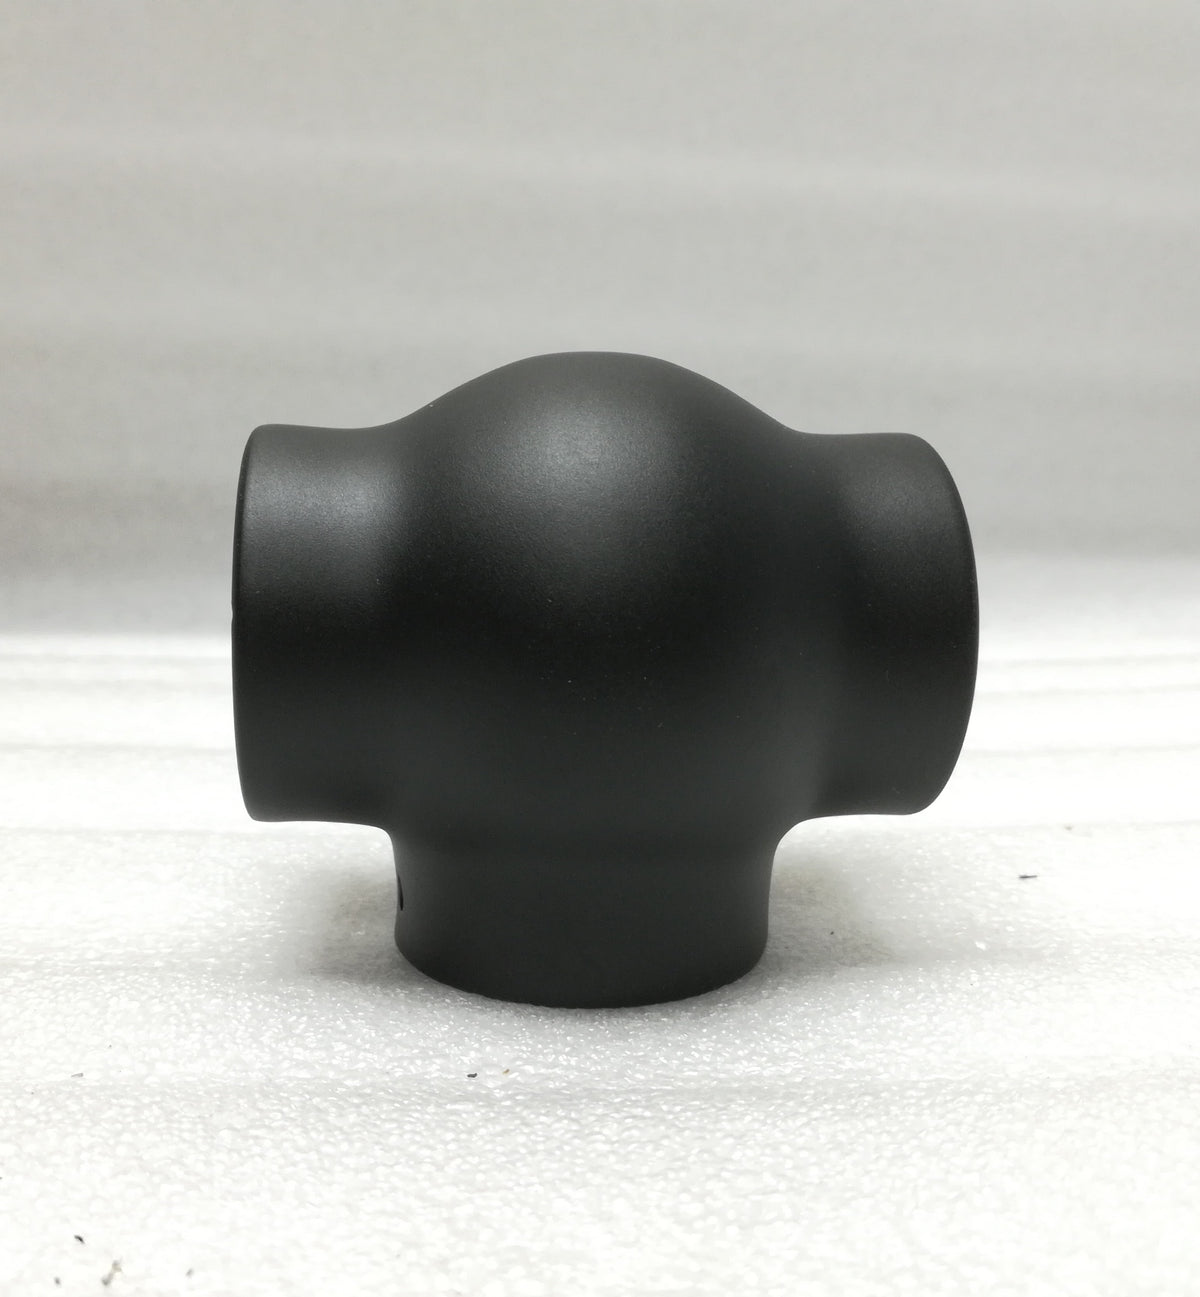 Ball Tee for 3" Tubing Ball Fittings, Components for 3" Od Tubing Matte-Black-Powder-Coated-Finish Trade Diversified